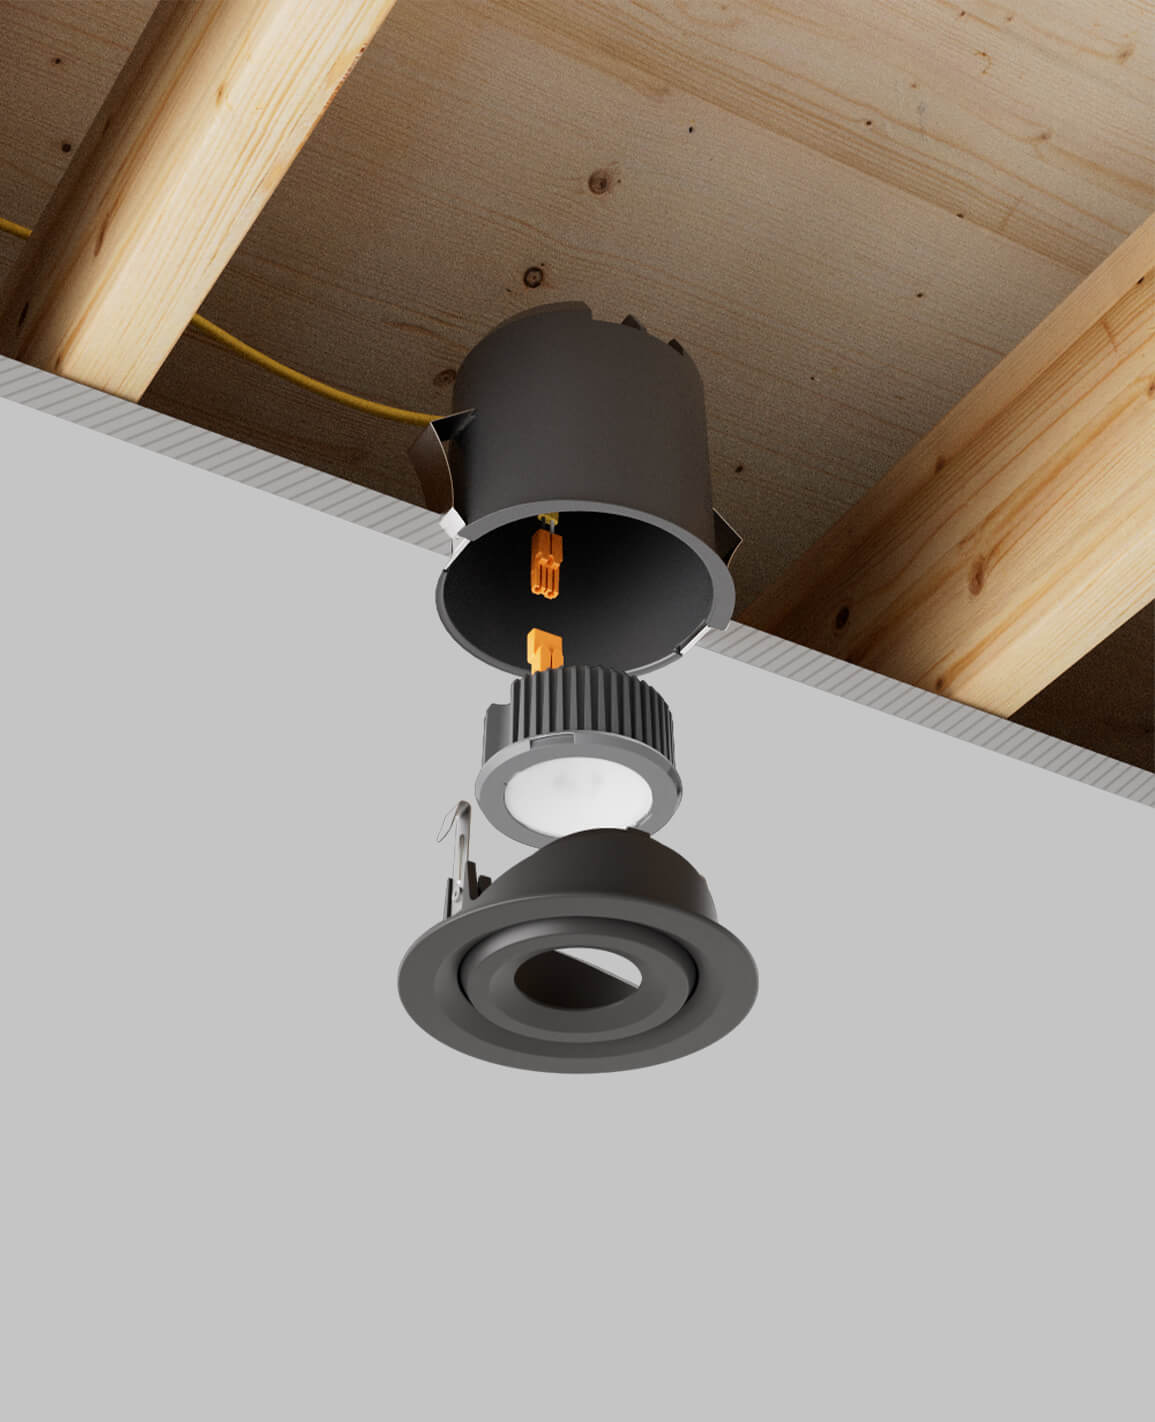 4" LUSA recessed light with remodel housing and black adjustable trim